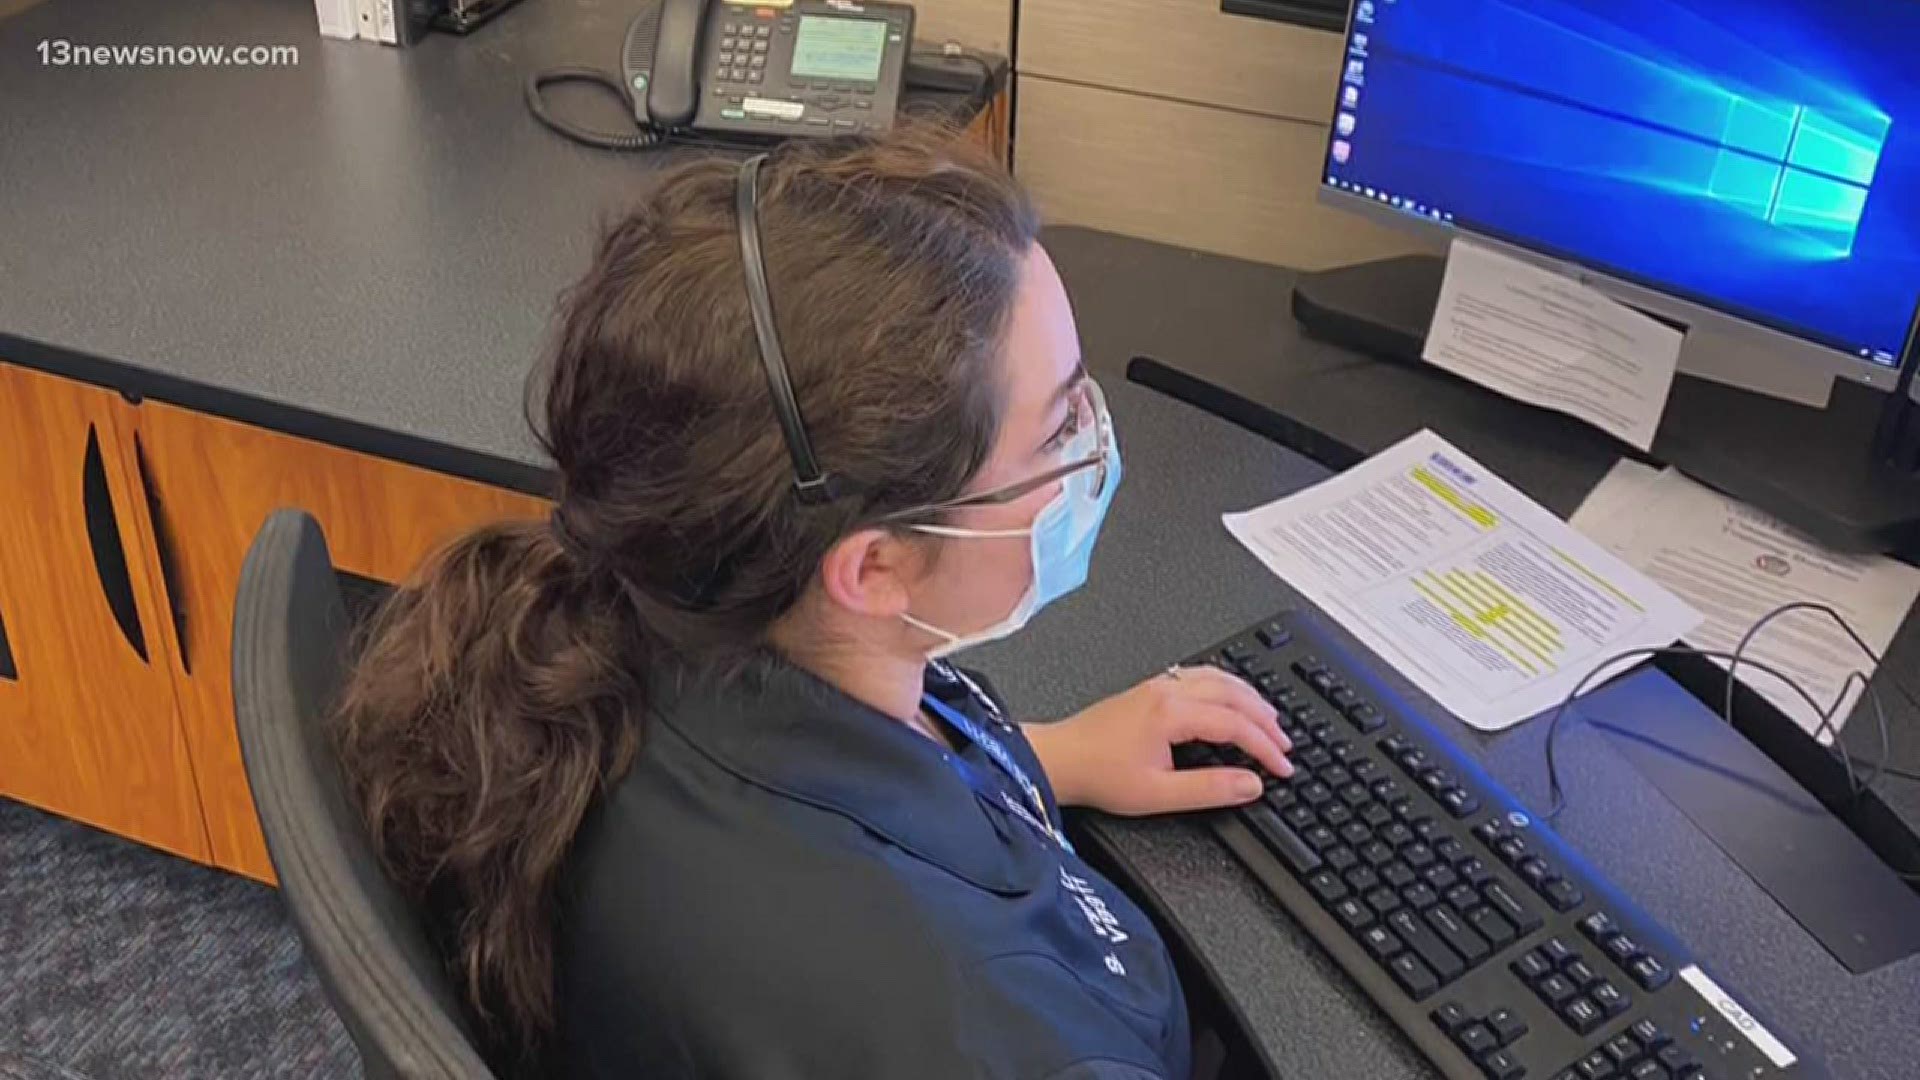 Dispatch officials said they're asking people the same questions: "Do you have a cough, fever or shortness of breath?" They're working to keep everyone safe.